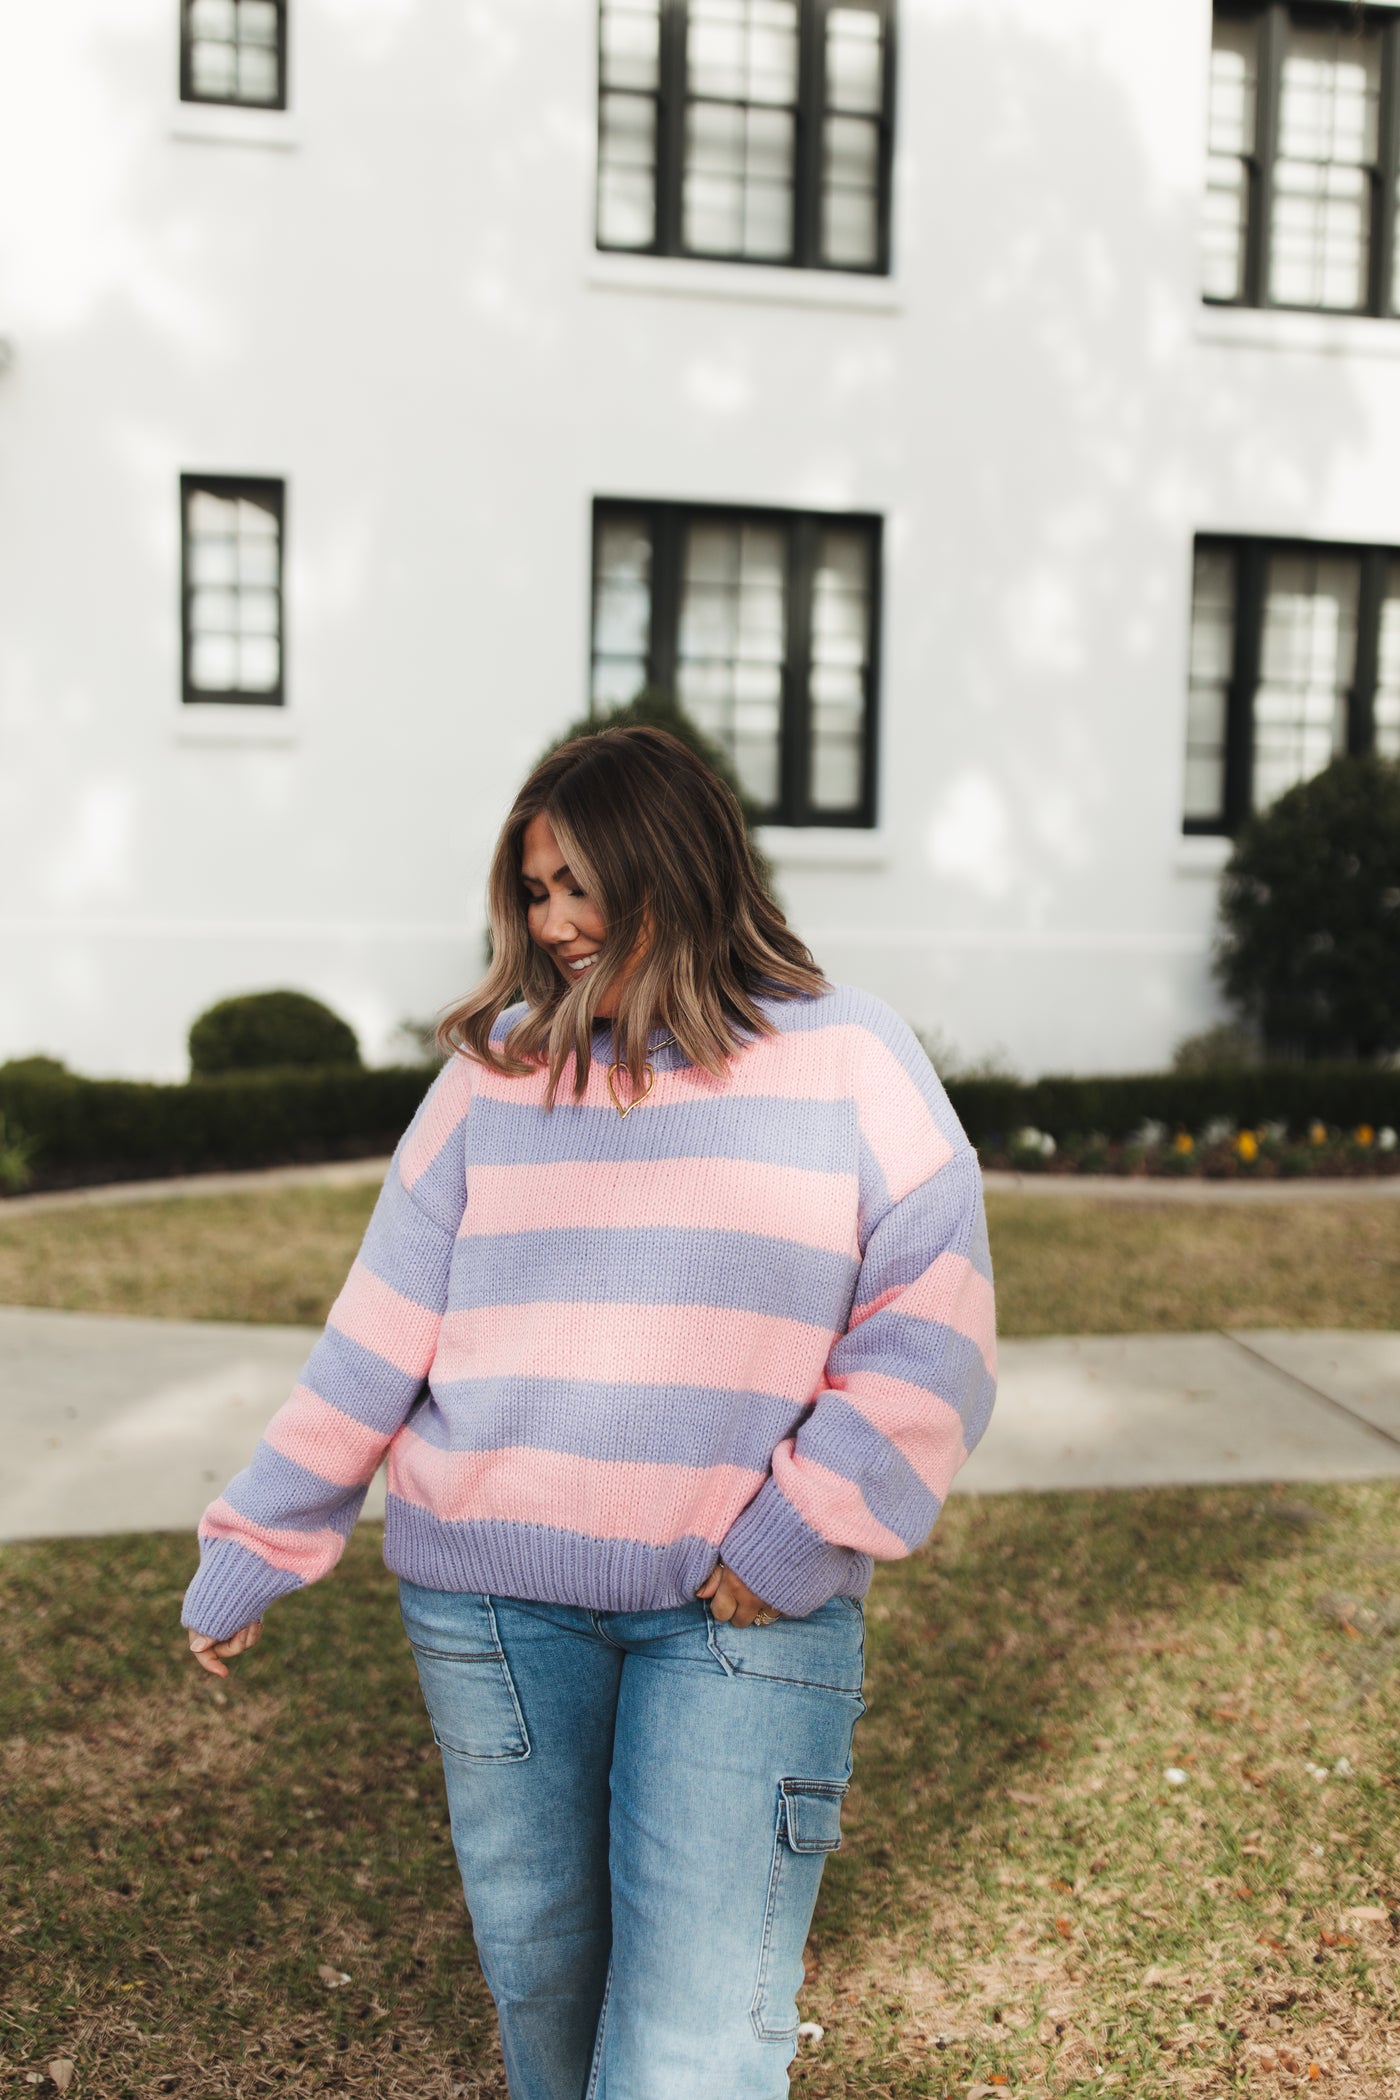 Lavender and Pink Colorblock Striped Sweater